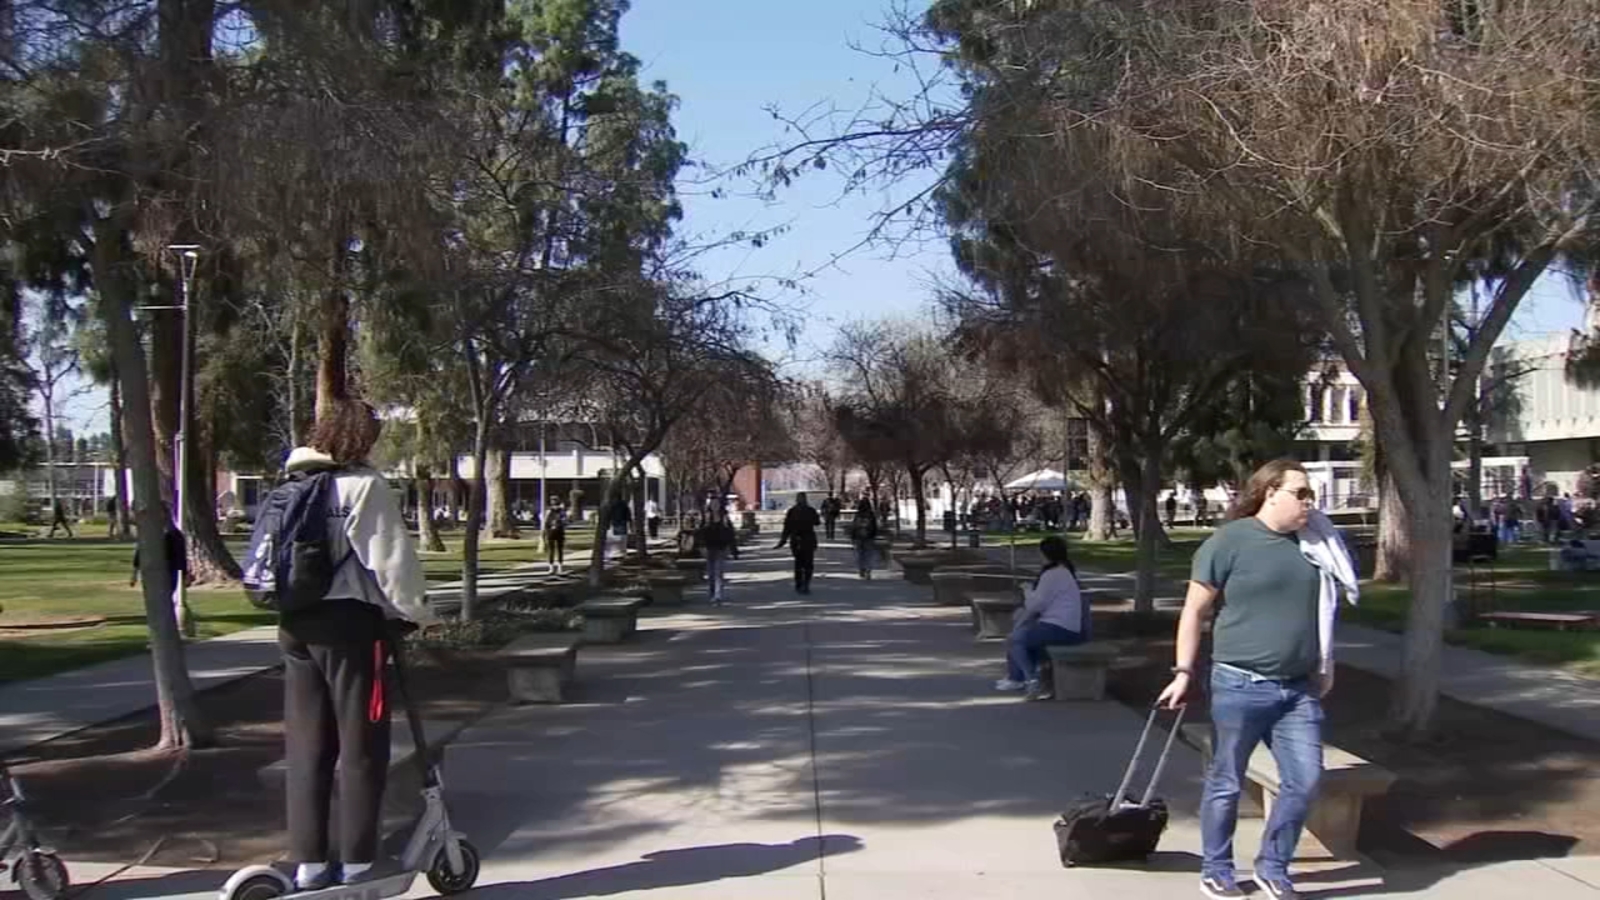 New minor in Water Education at Fresno State [Video]